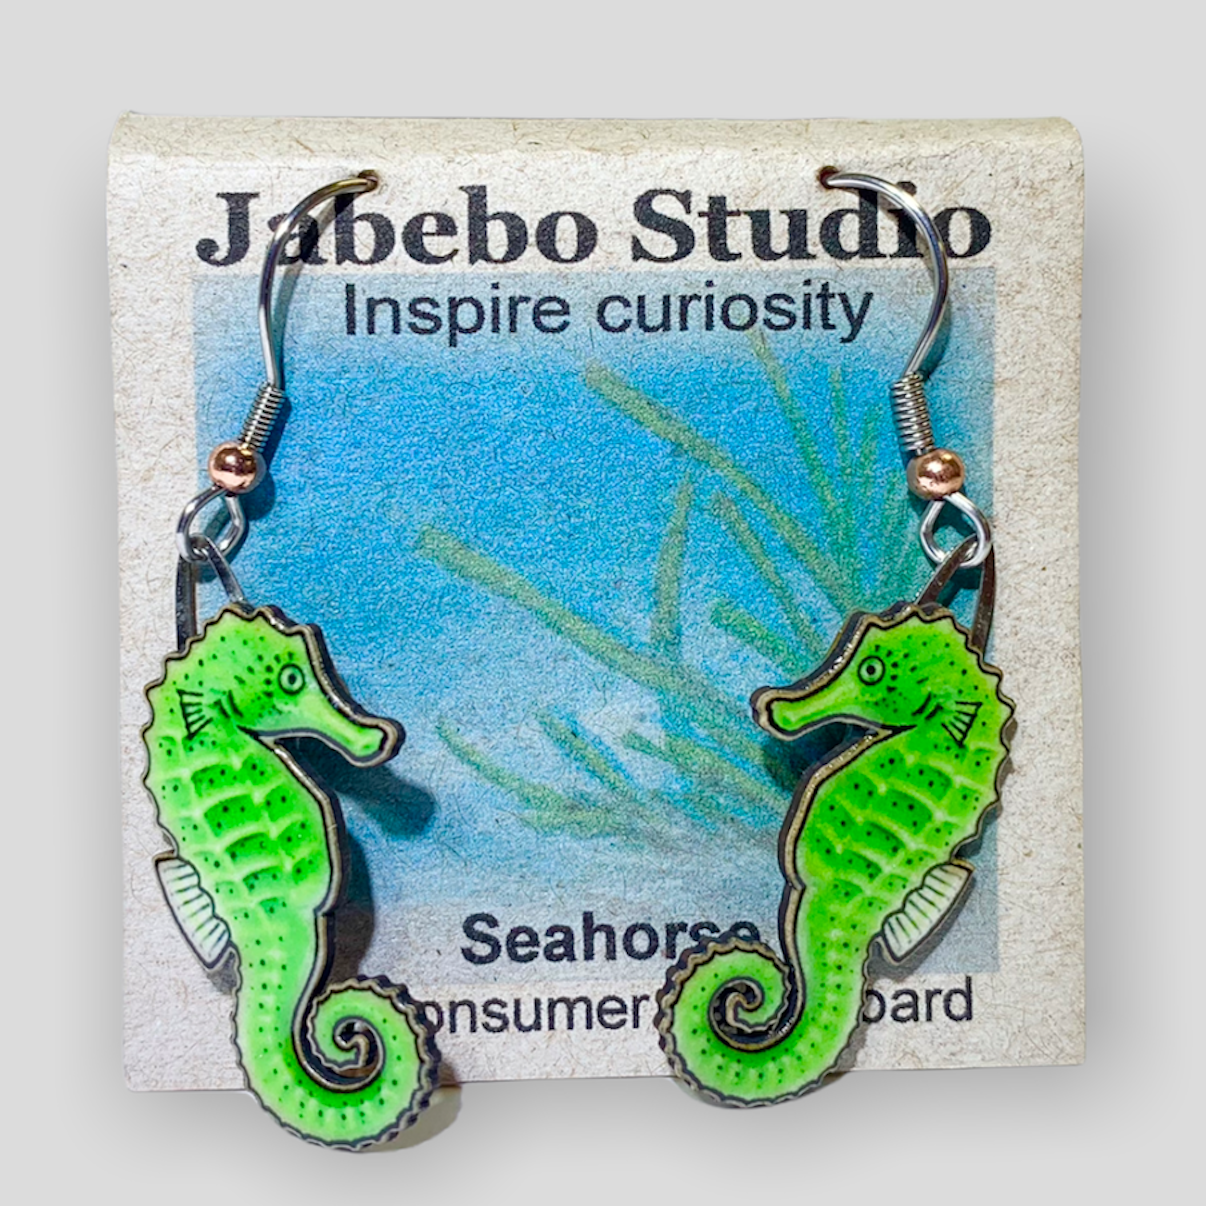 Picture shown is of 1 inch tall pair of earrings of the marine animal the Green Seahorse.